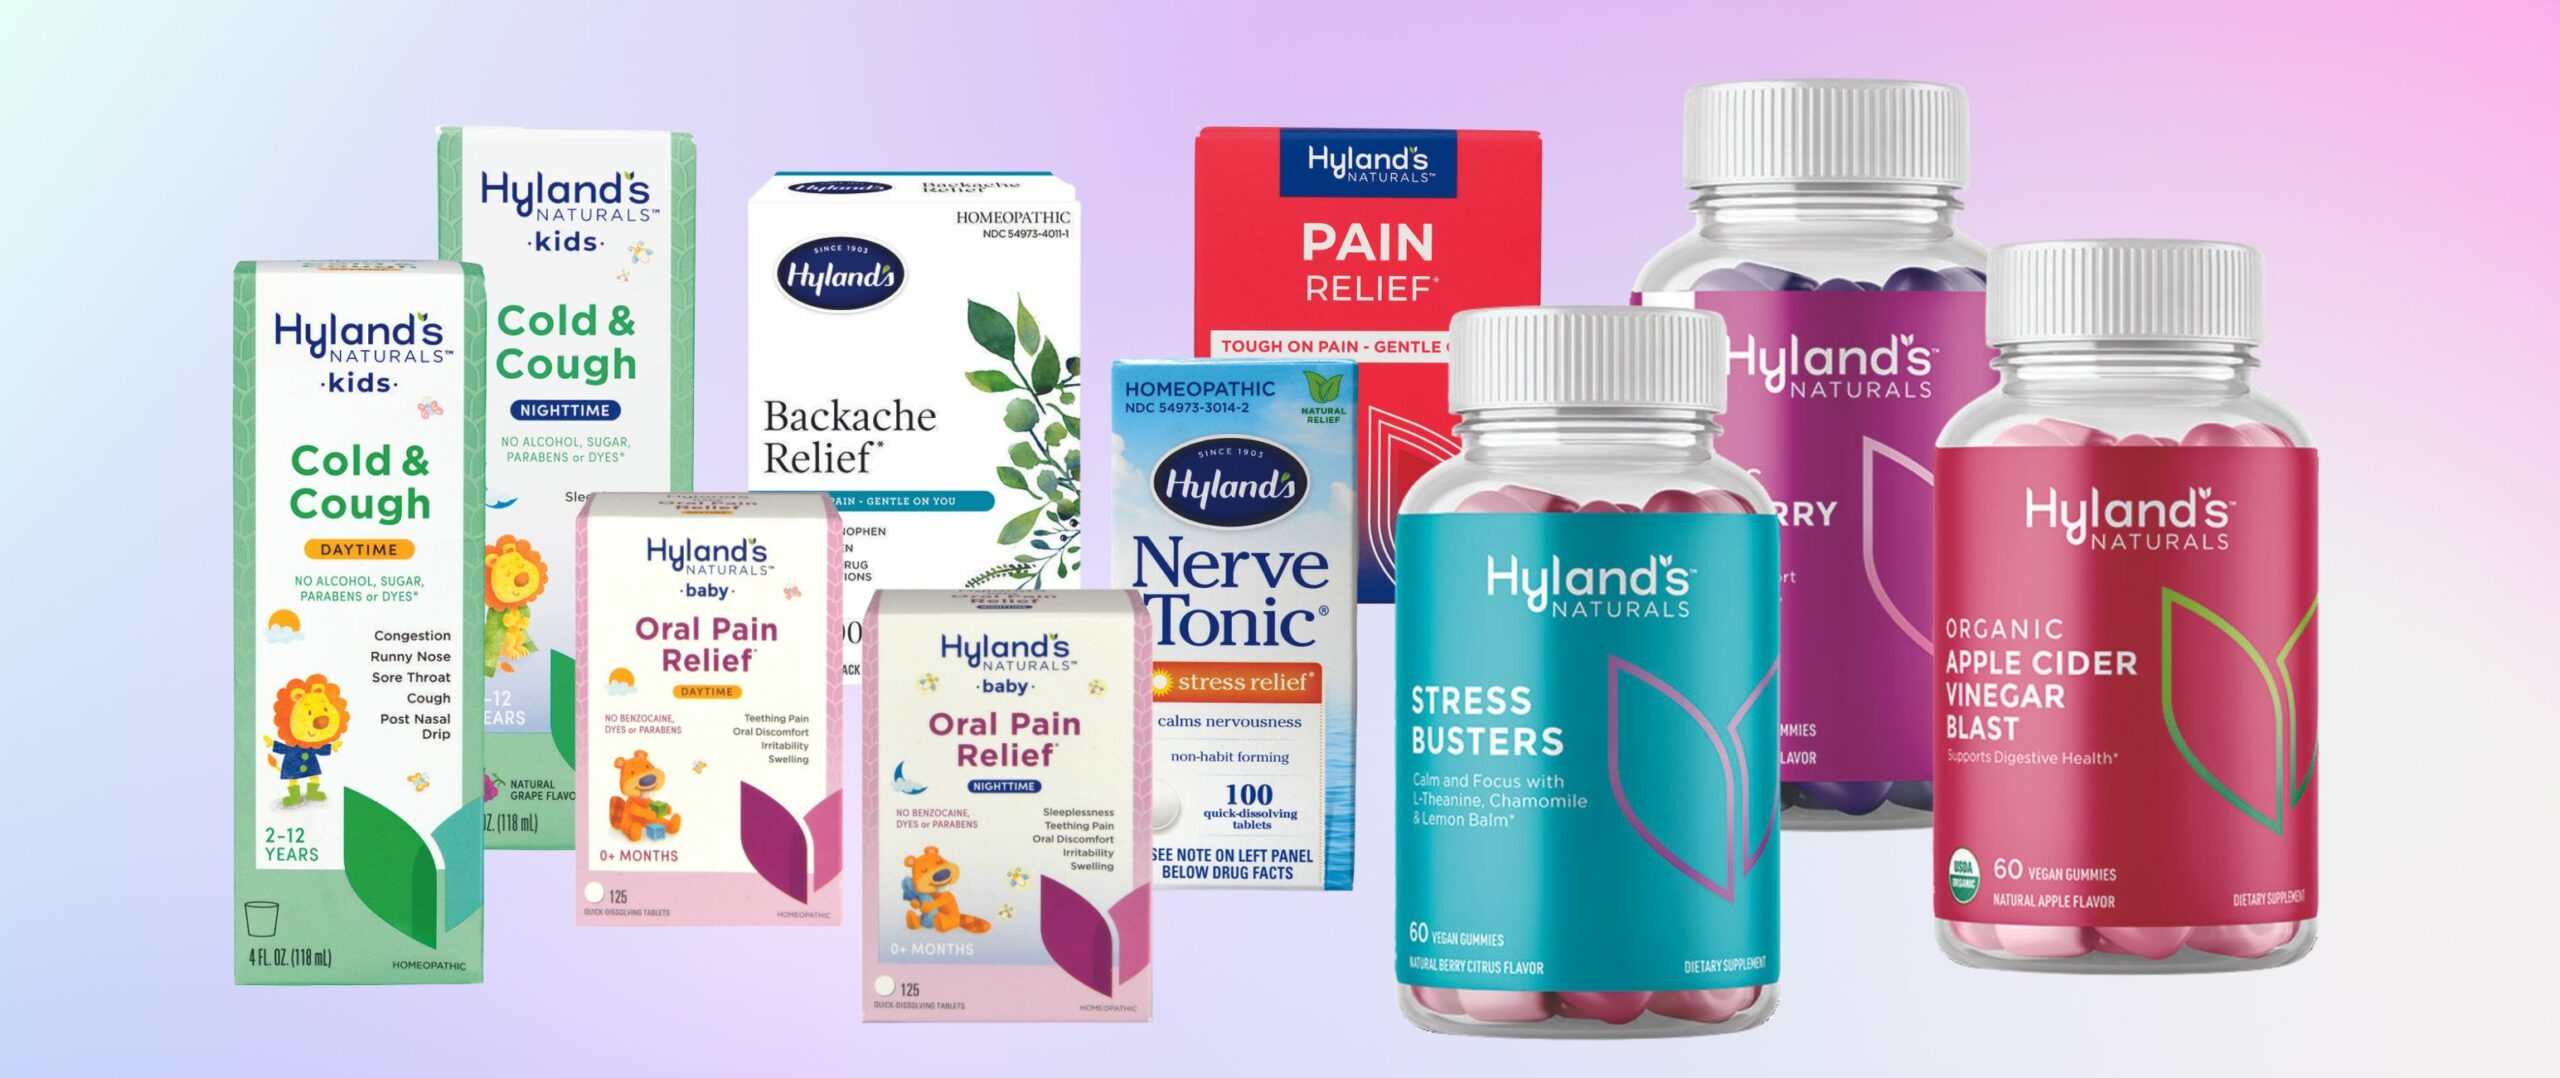 Hyland’s Naturals scours the earth to bring you plant-based natural or organic active ingredients that are safe, effective and cruelty-free. Keep your entire family healthy with a wide variety of products!